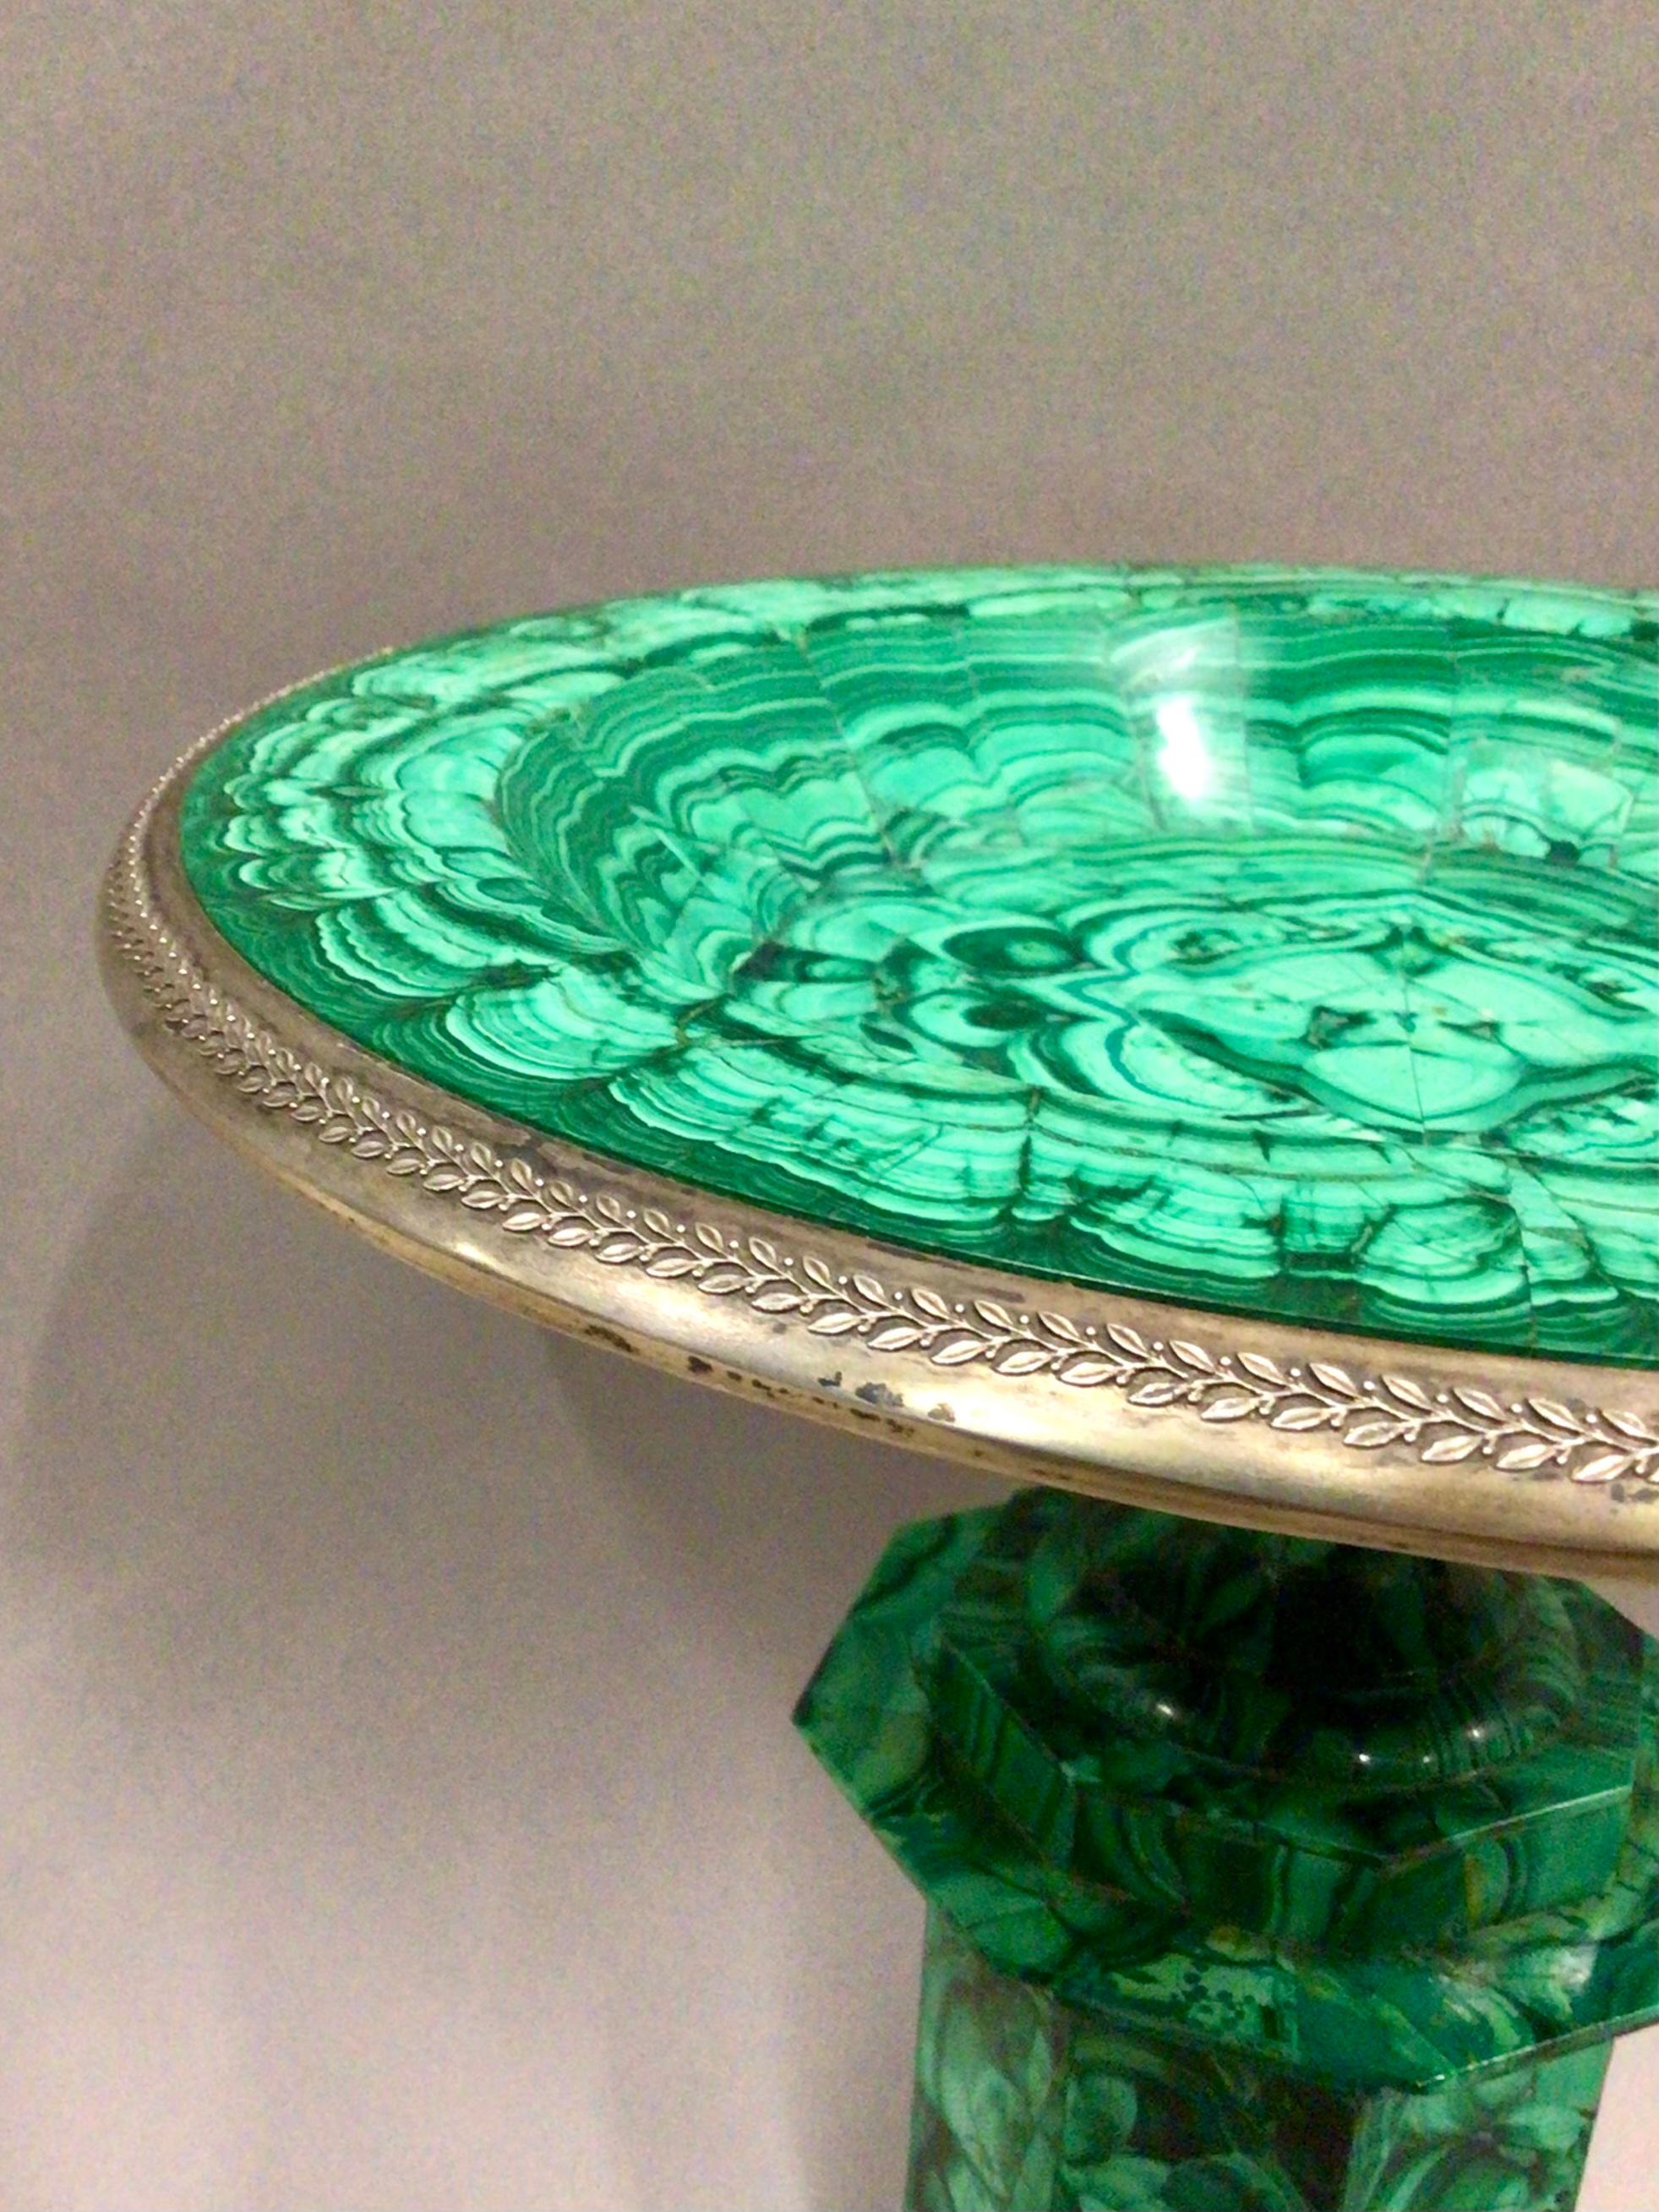 Large C19th Russian Malachite Tazza In Good Condition For Sale In Shipston-On-Stour, GB